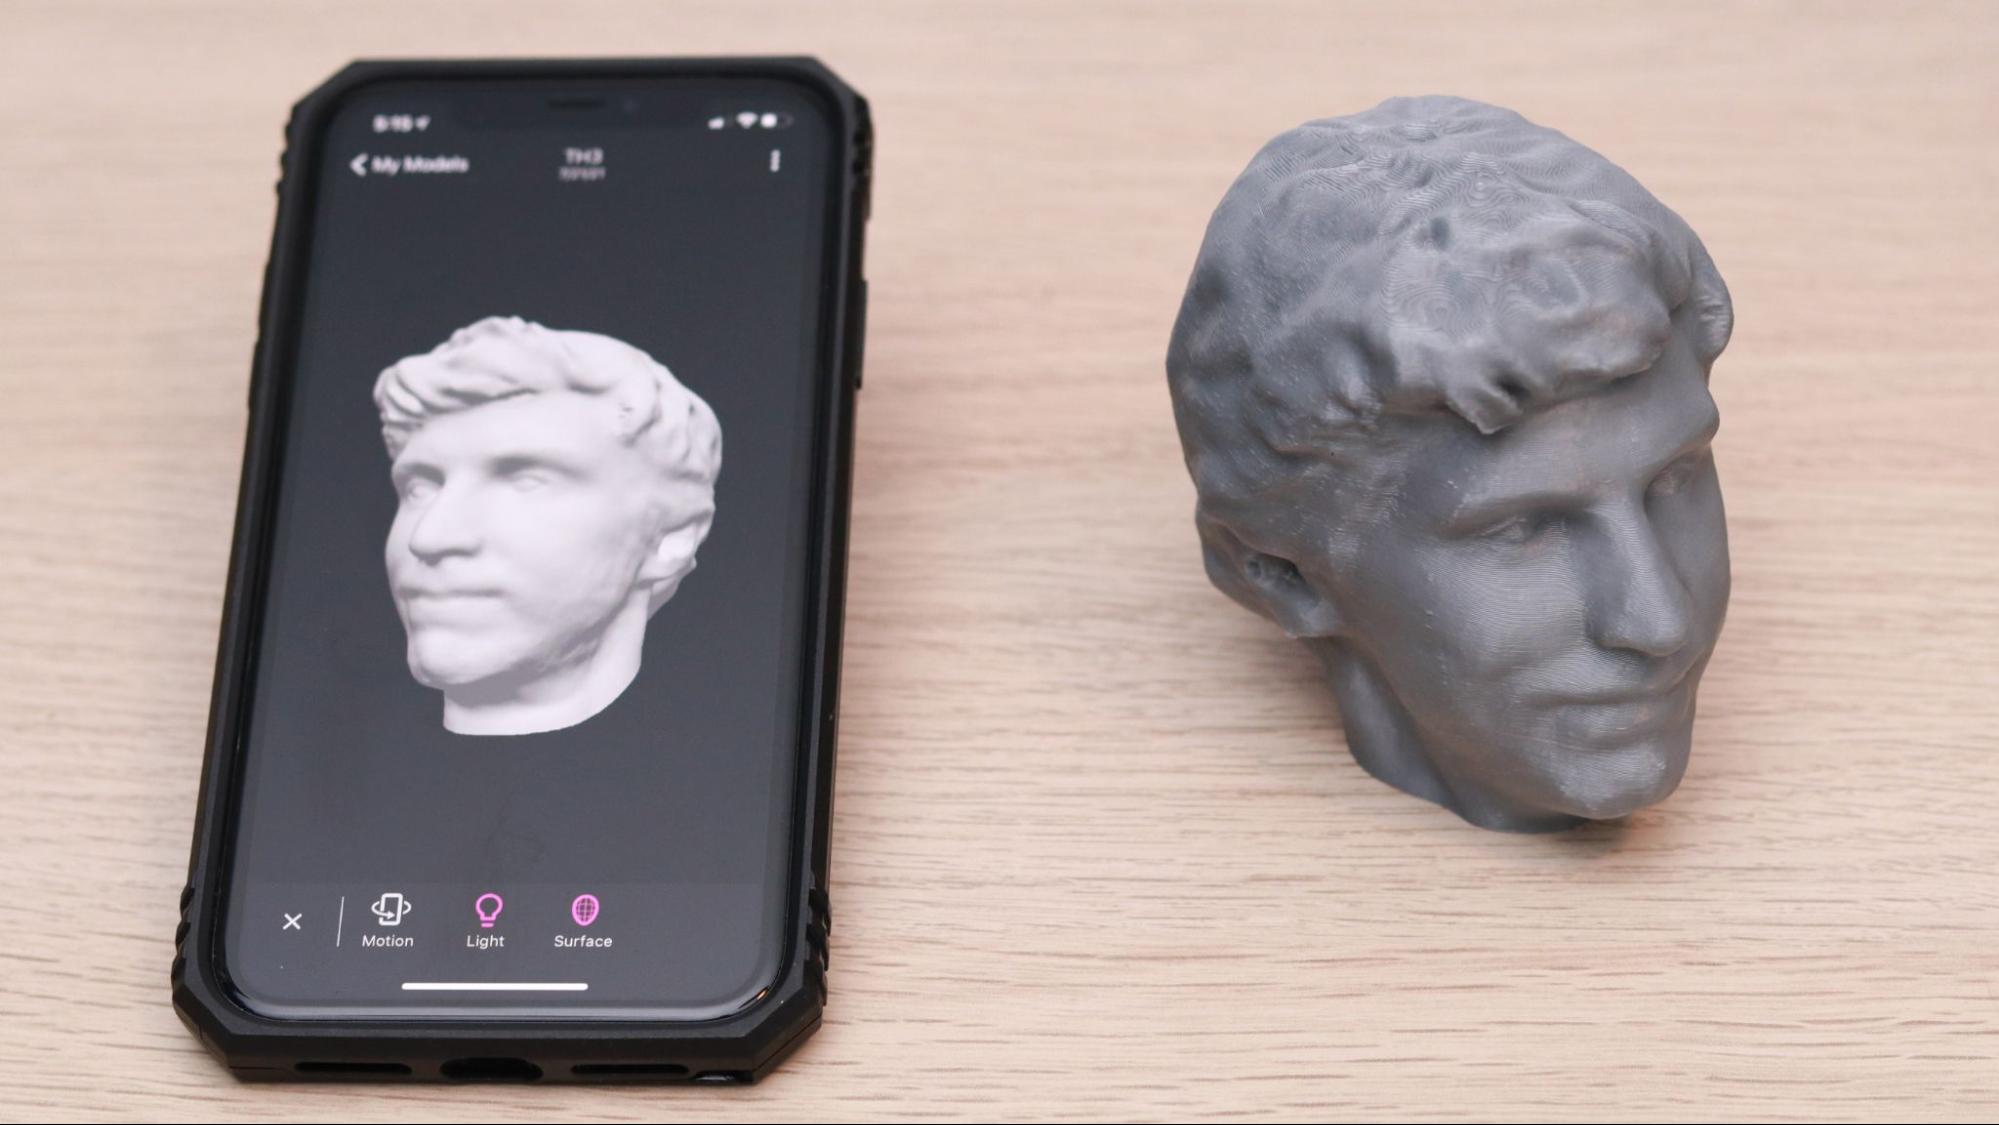 How to Make a 3D Printed Selfie With Your Phone Tom's Hardware